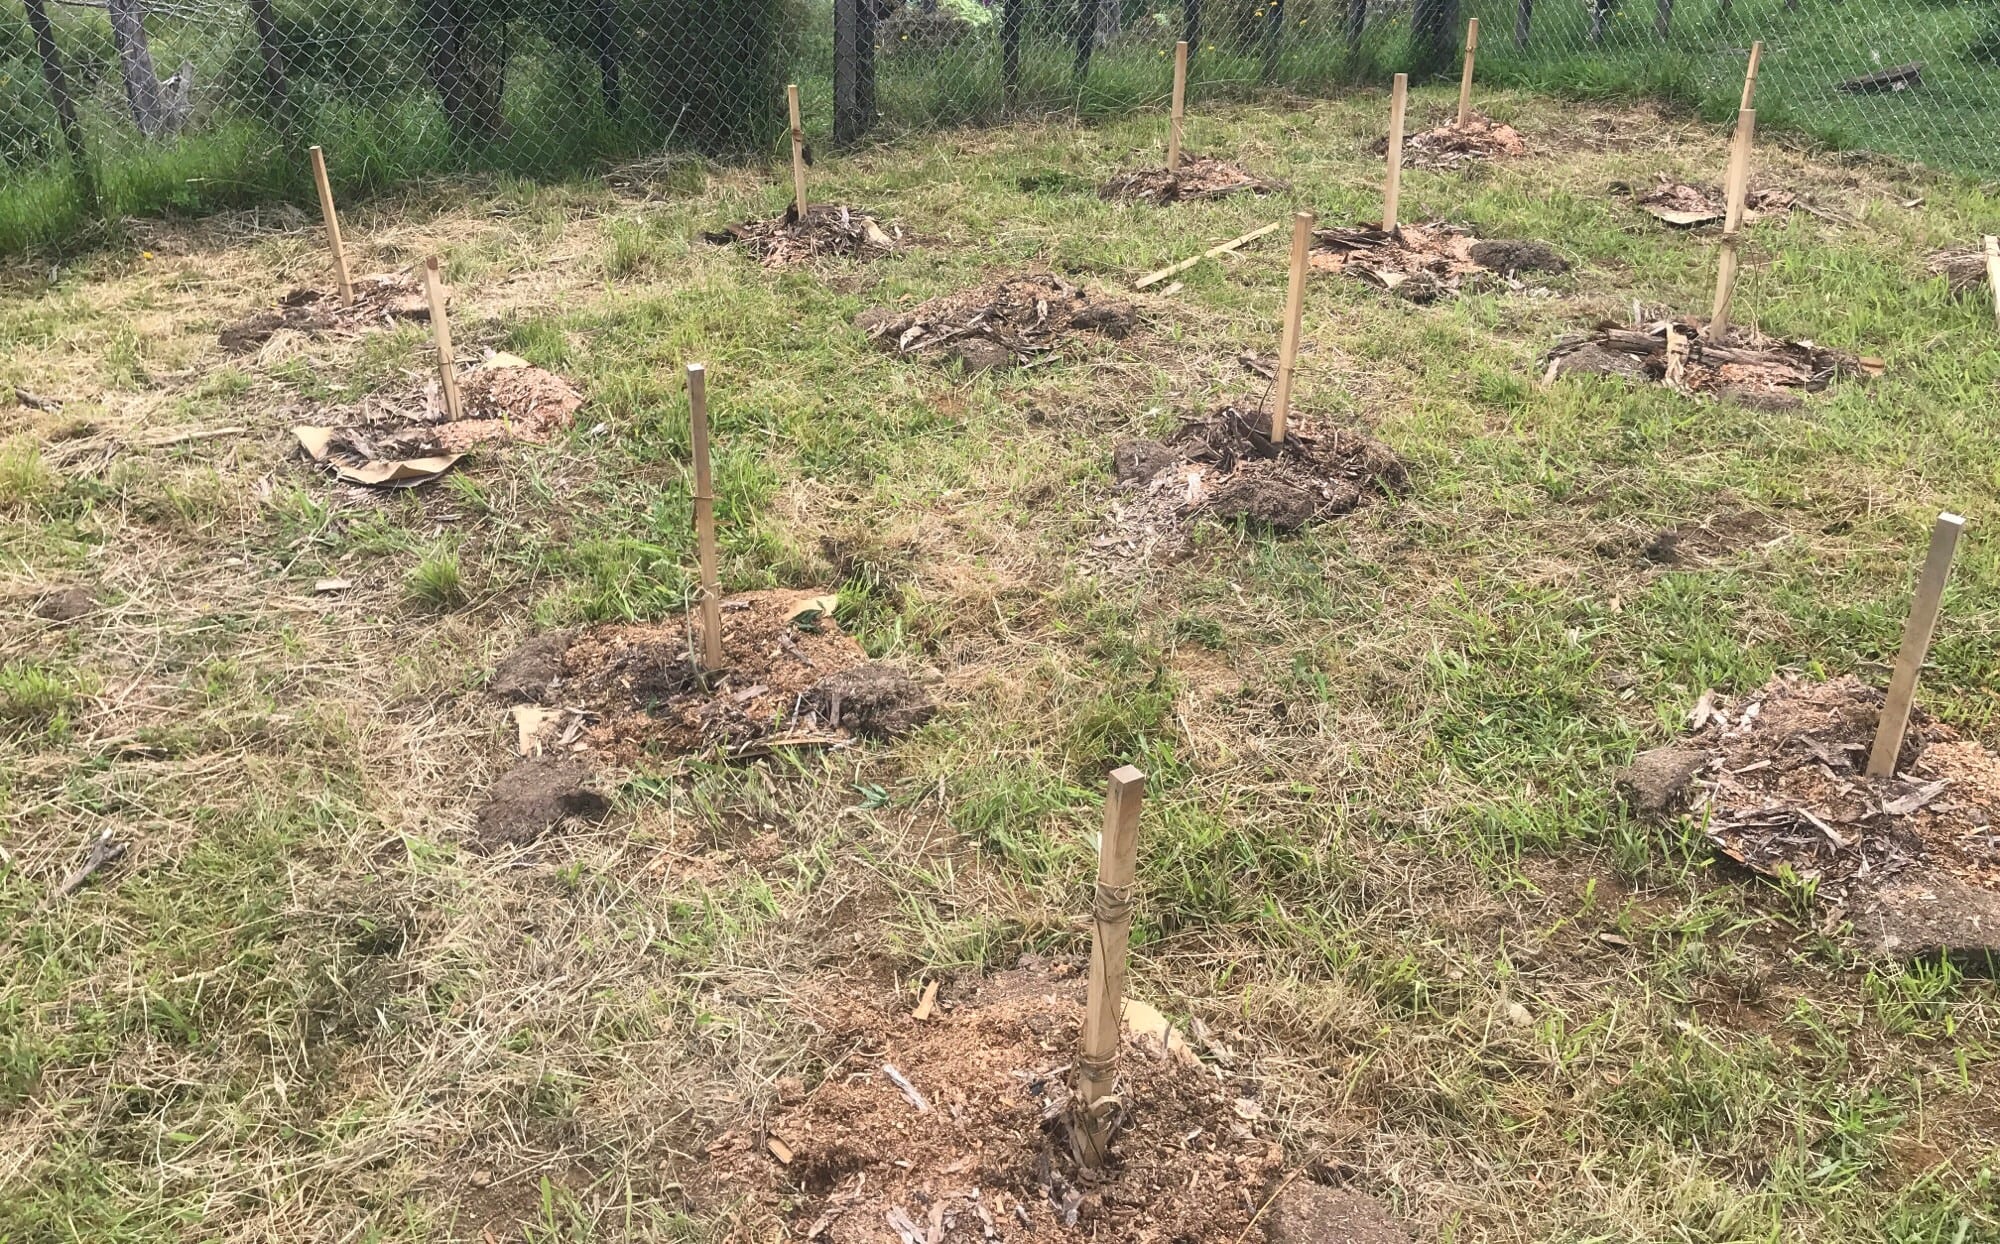 Willie Kaa's trial site after the hemp plants were removed by police